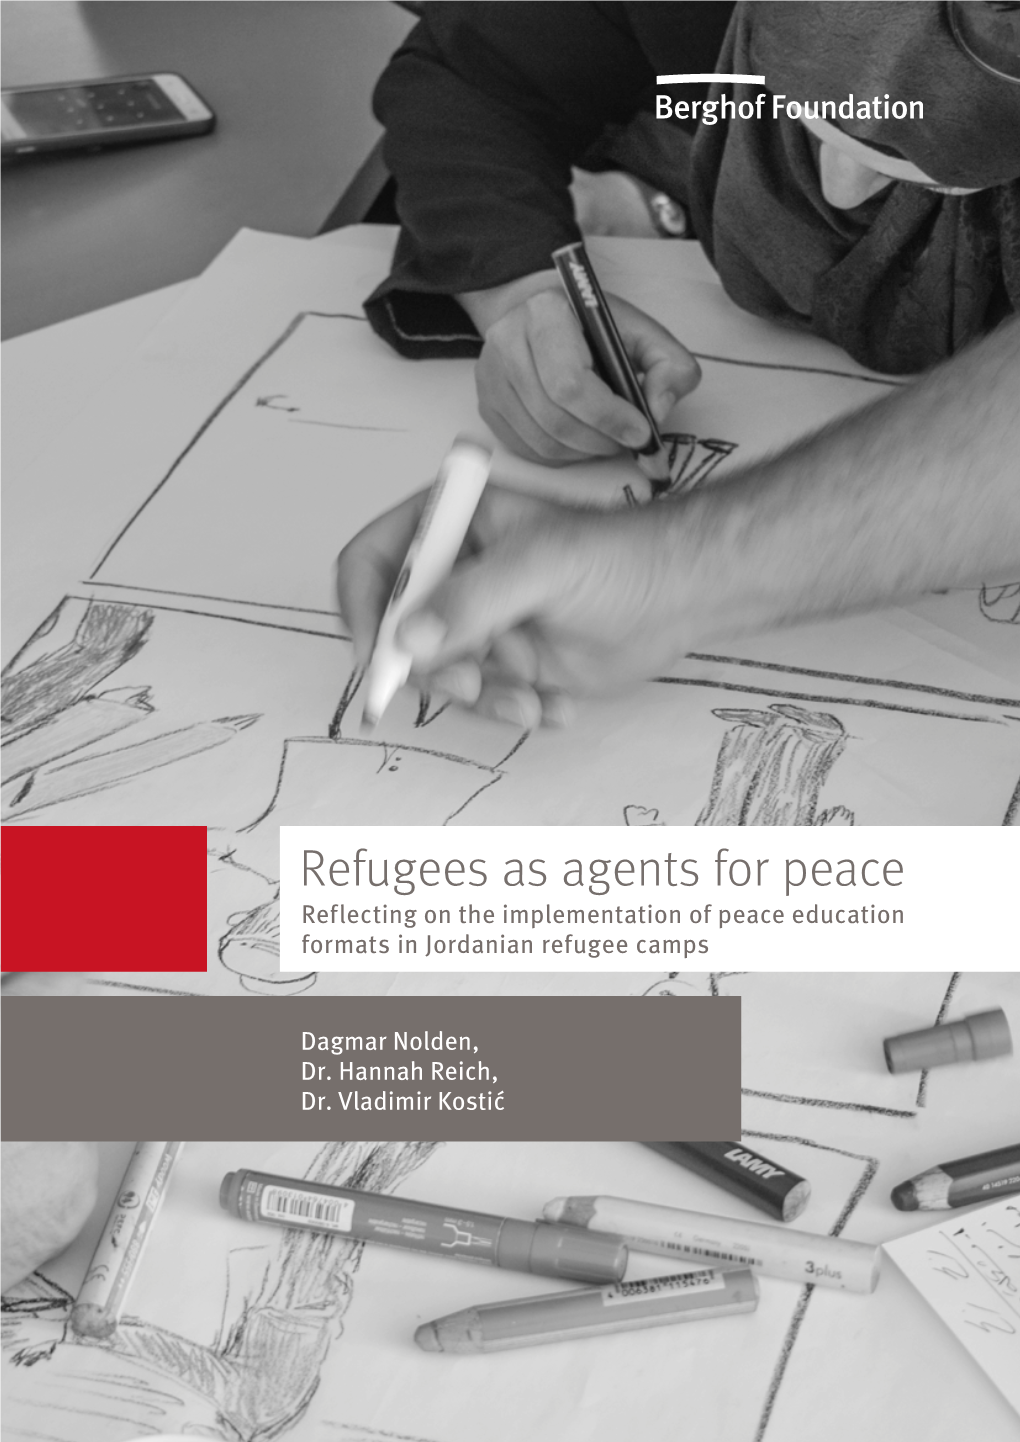 Refugees As Agents for Peace Reflecting on the Implementation of Peace Education Formats in Jordanian Refugee Camps